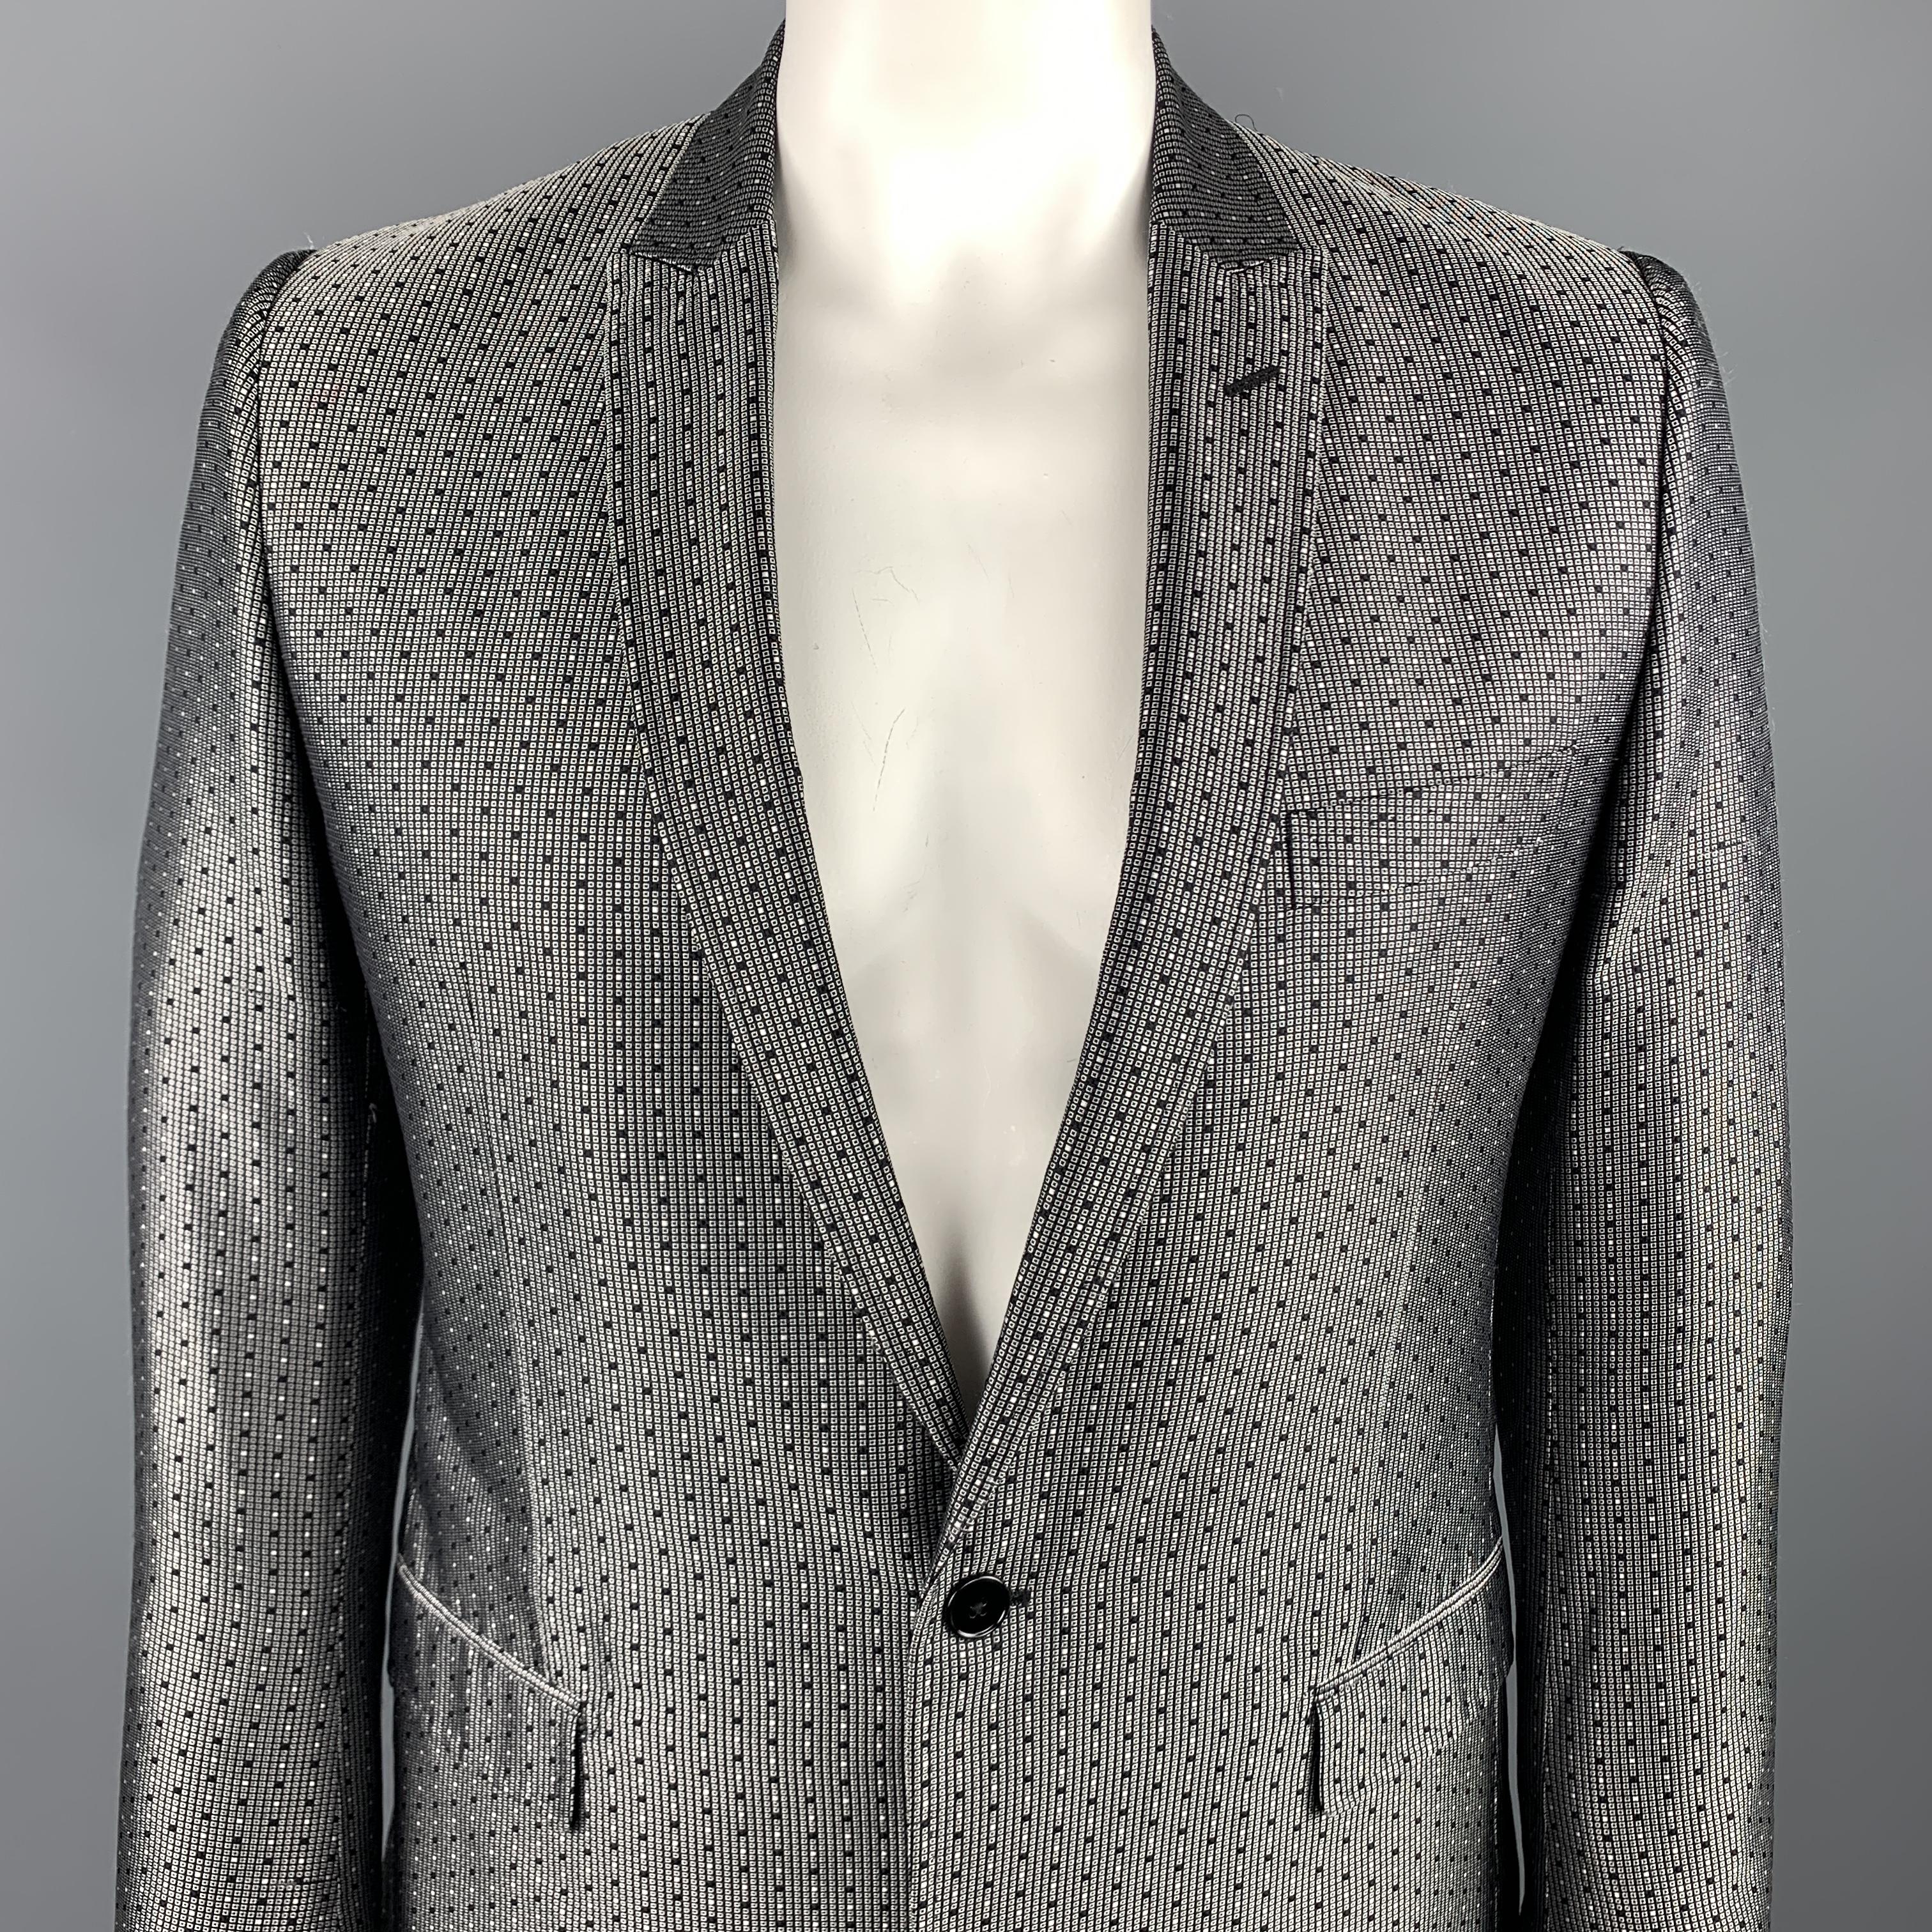 DOLCE & GABBANA sport coat comes in a black and silver jacquard silk featuring a peak lapel style, flap pockets, and a single button closure. Made in Italy.

Excellent Pre-Owned Condition.
Marked: IT 52

Measurements:

Shoulder: 17.5 in. 
Chest: 42